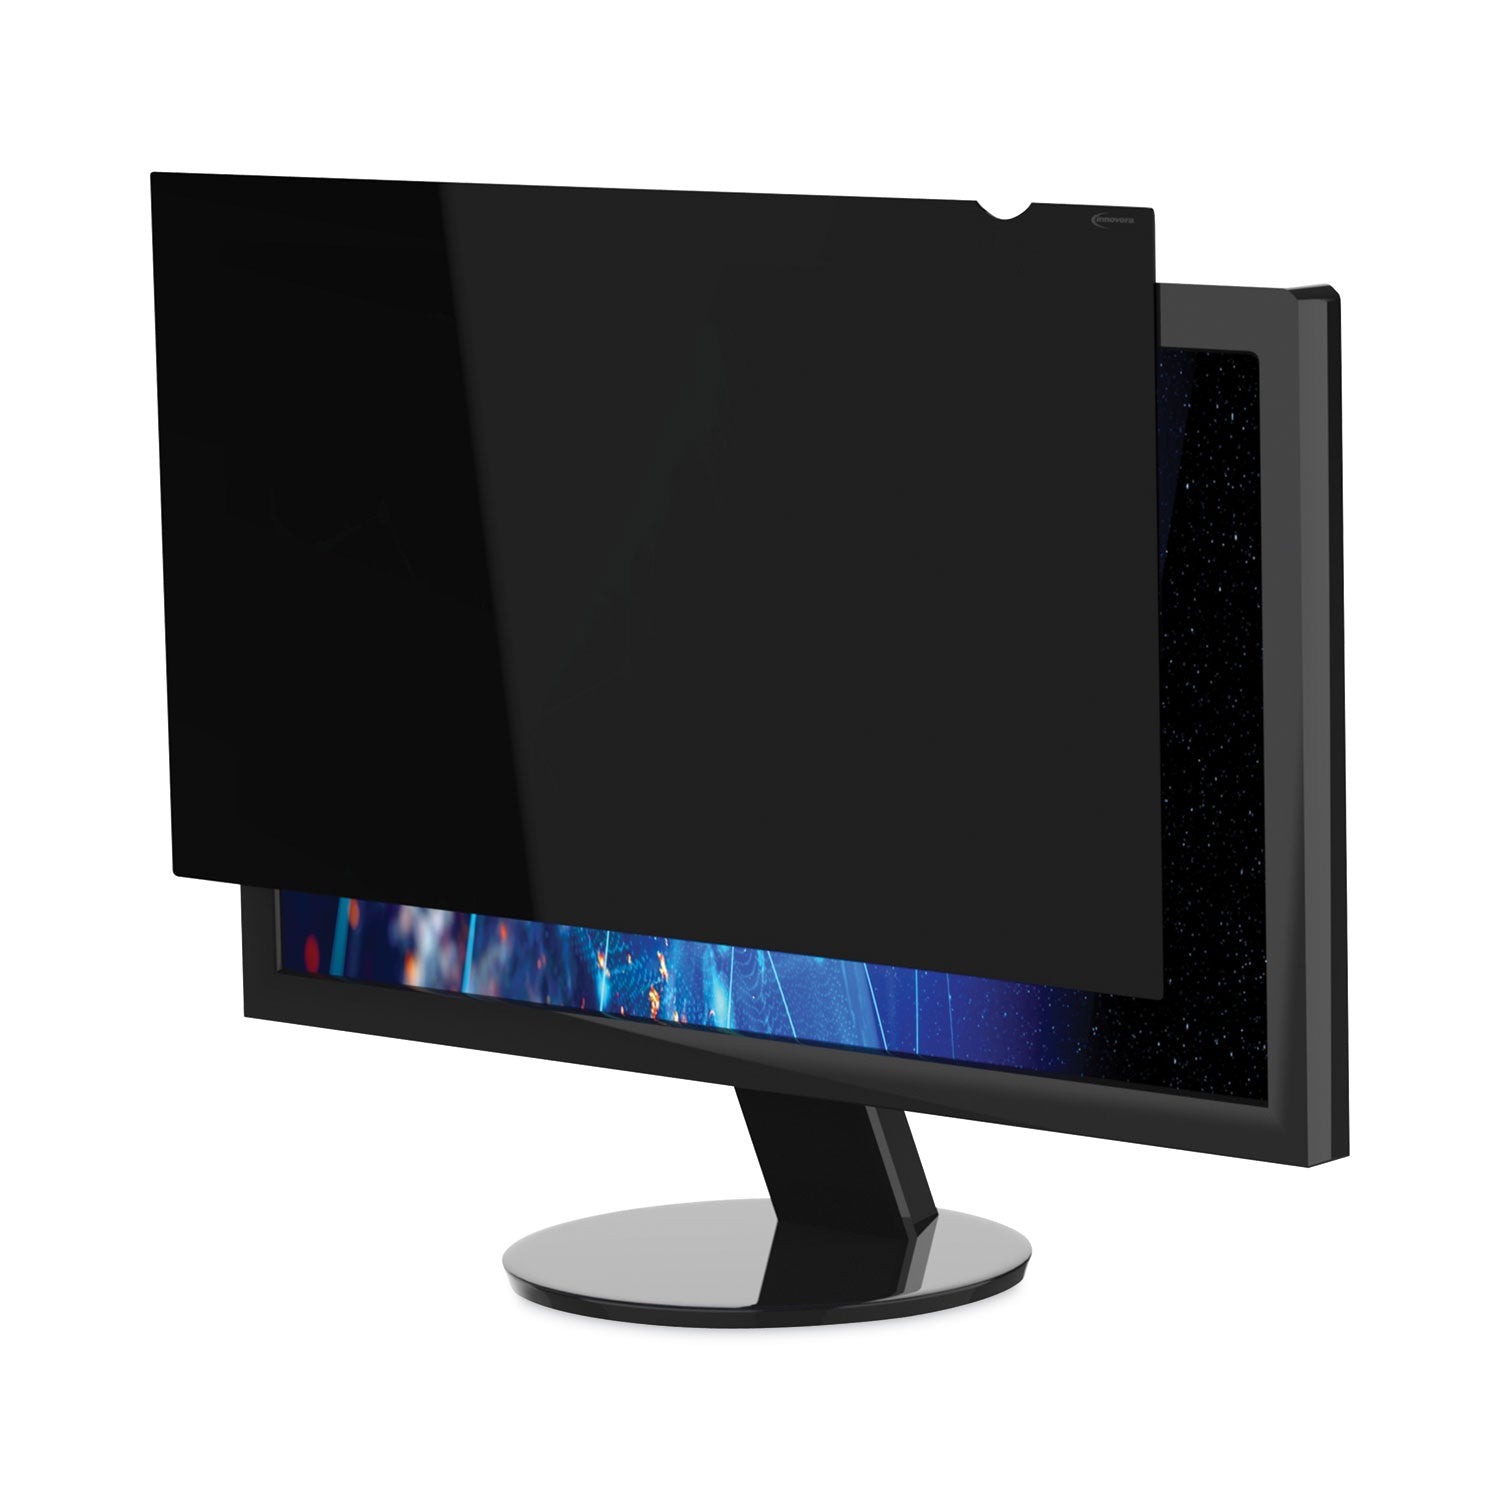 blackout-privacy-monitor-filter-for-238-widescreen-flat-panel-monitor-169-aspect-ratio_ivrblf238w - 3